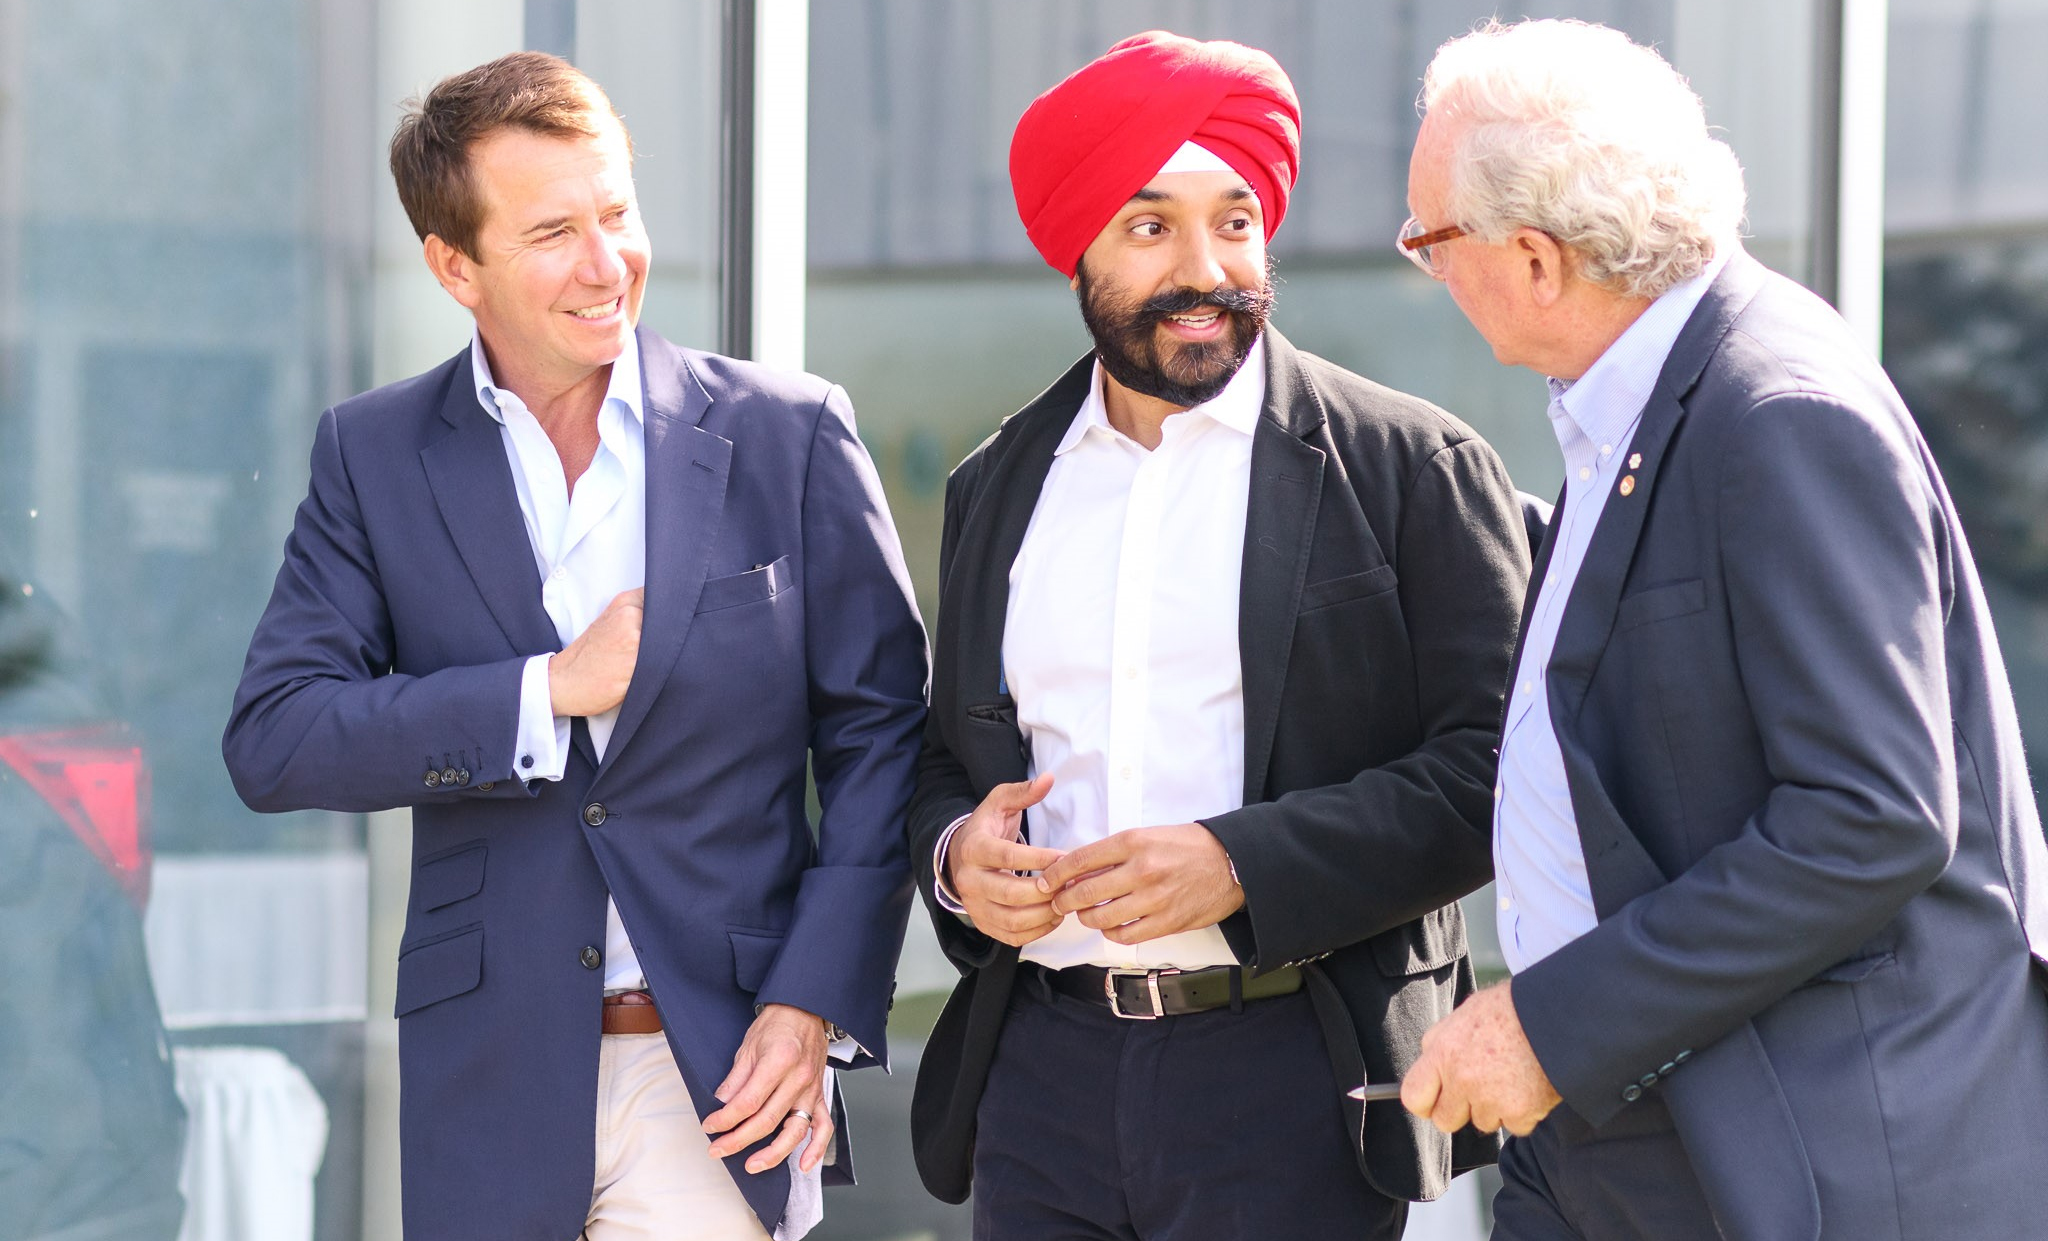 July 10, 2018 - The Honourable Scott Brison, President of the Treasury Board and the Honourable Navdeep Bains, Minister of Innovation, Science and Economic Development and Minister responsible for the Atlantic Canada Opportunities Agency have a chat with the Honourable H. Wade MacLauchlan, Premier of Prince Edward Island on their arrival to the Atlantic Growth Strategy Leadership Committee meeting in Summerside, PEI.